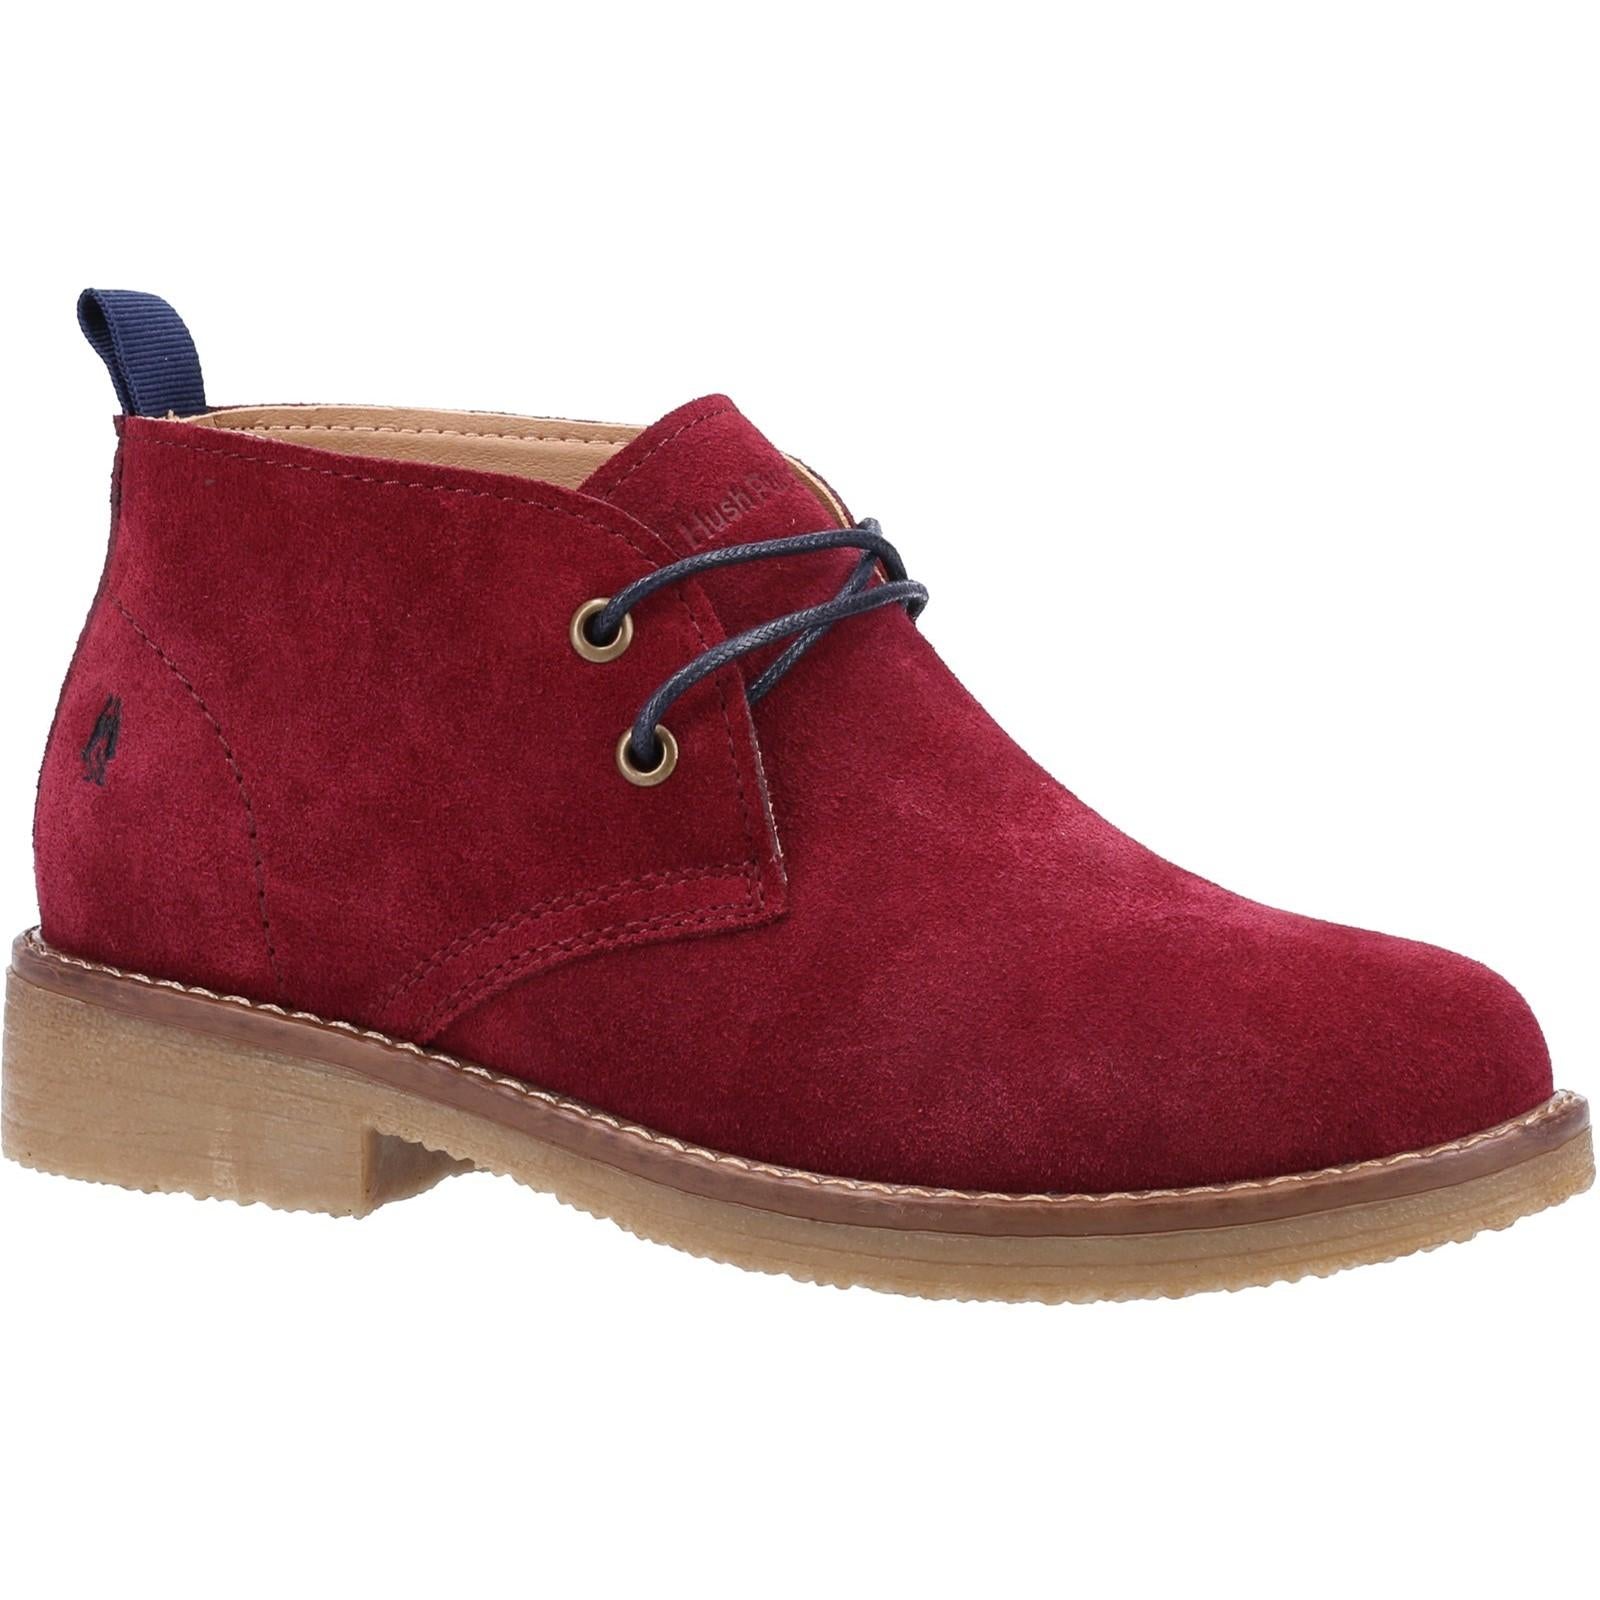 Hush Puppies Marie Ankle Boots